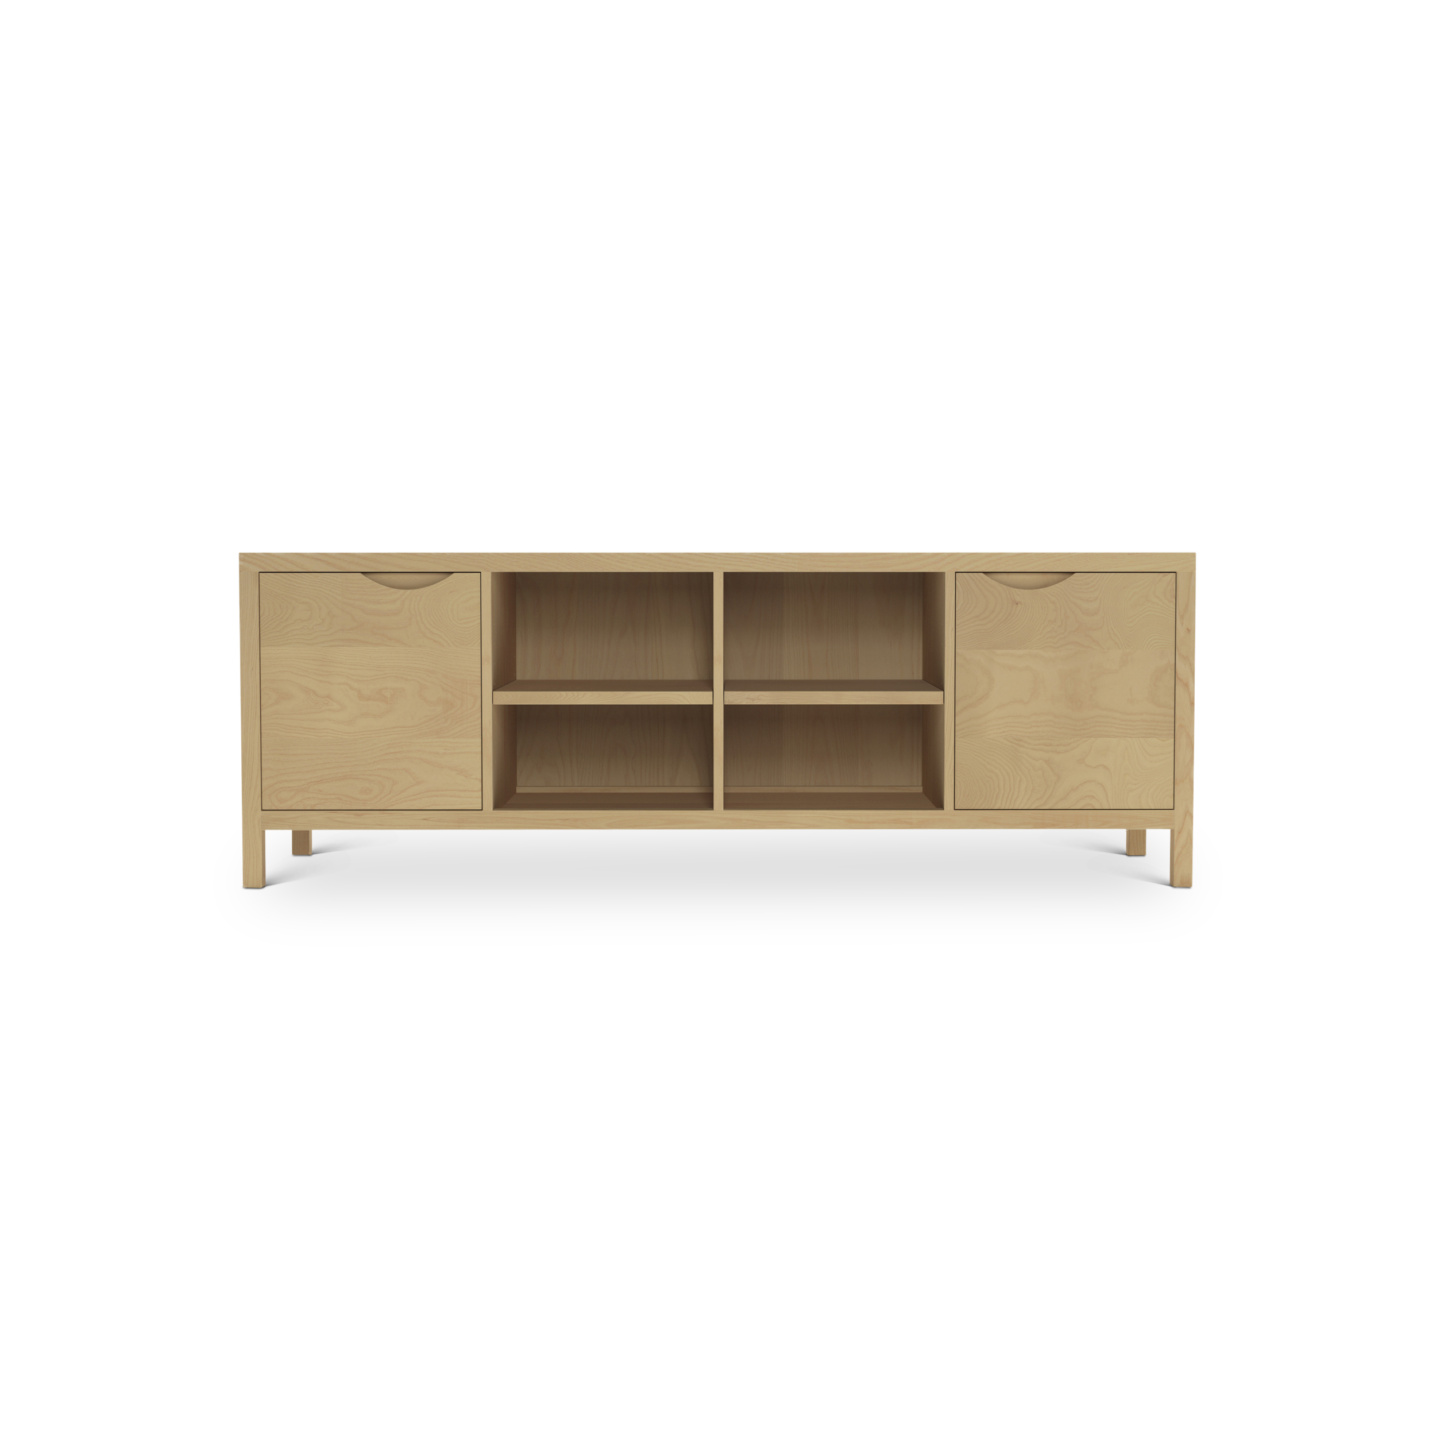 American made 72" solid ash modern media cabinet